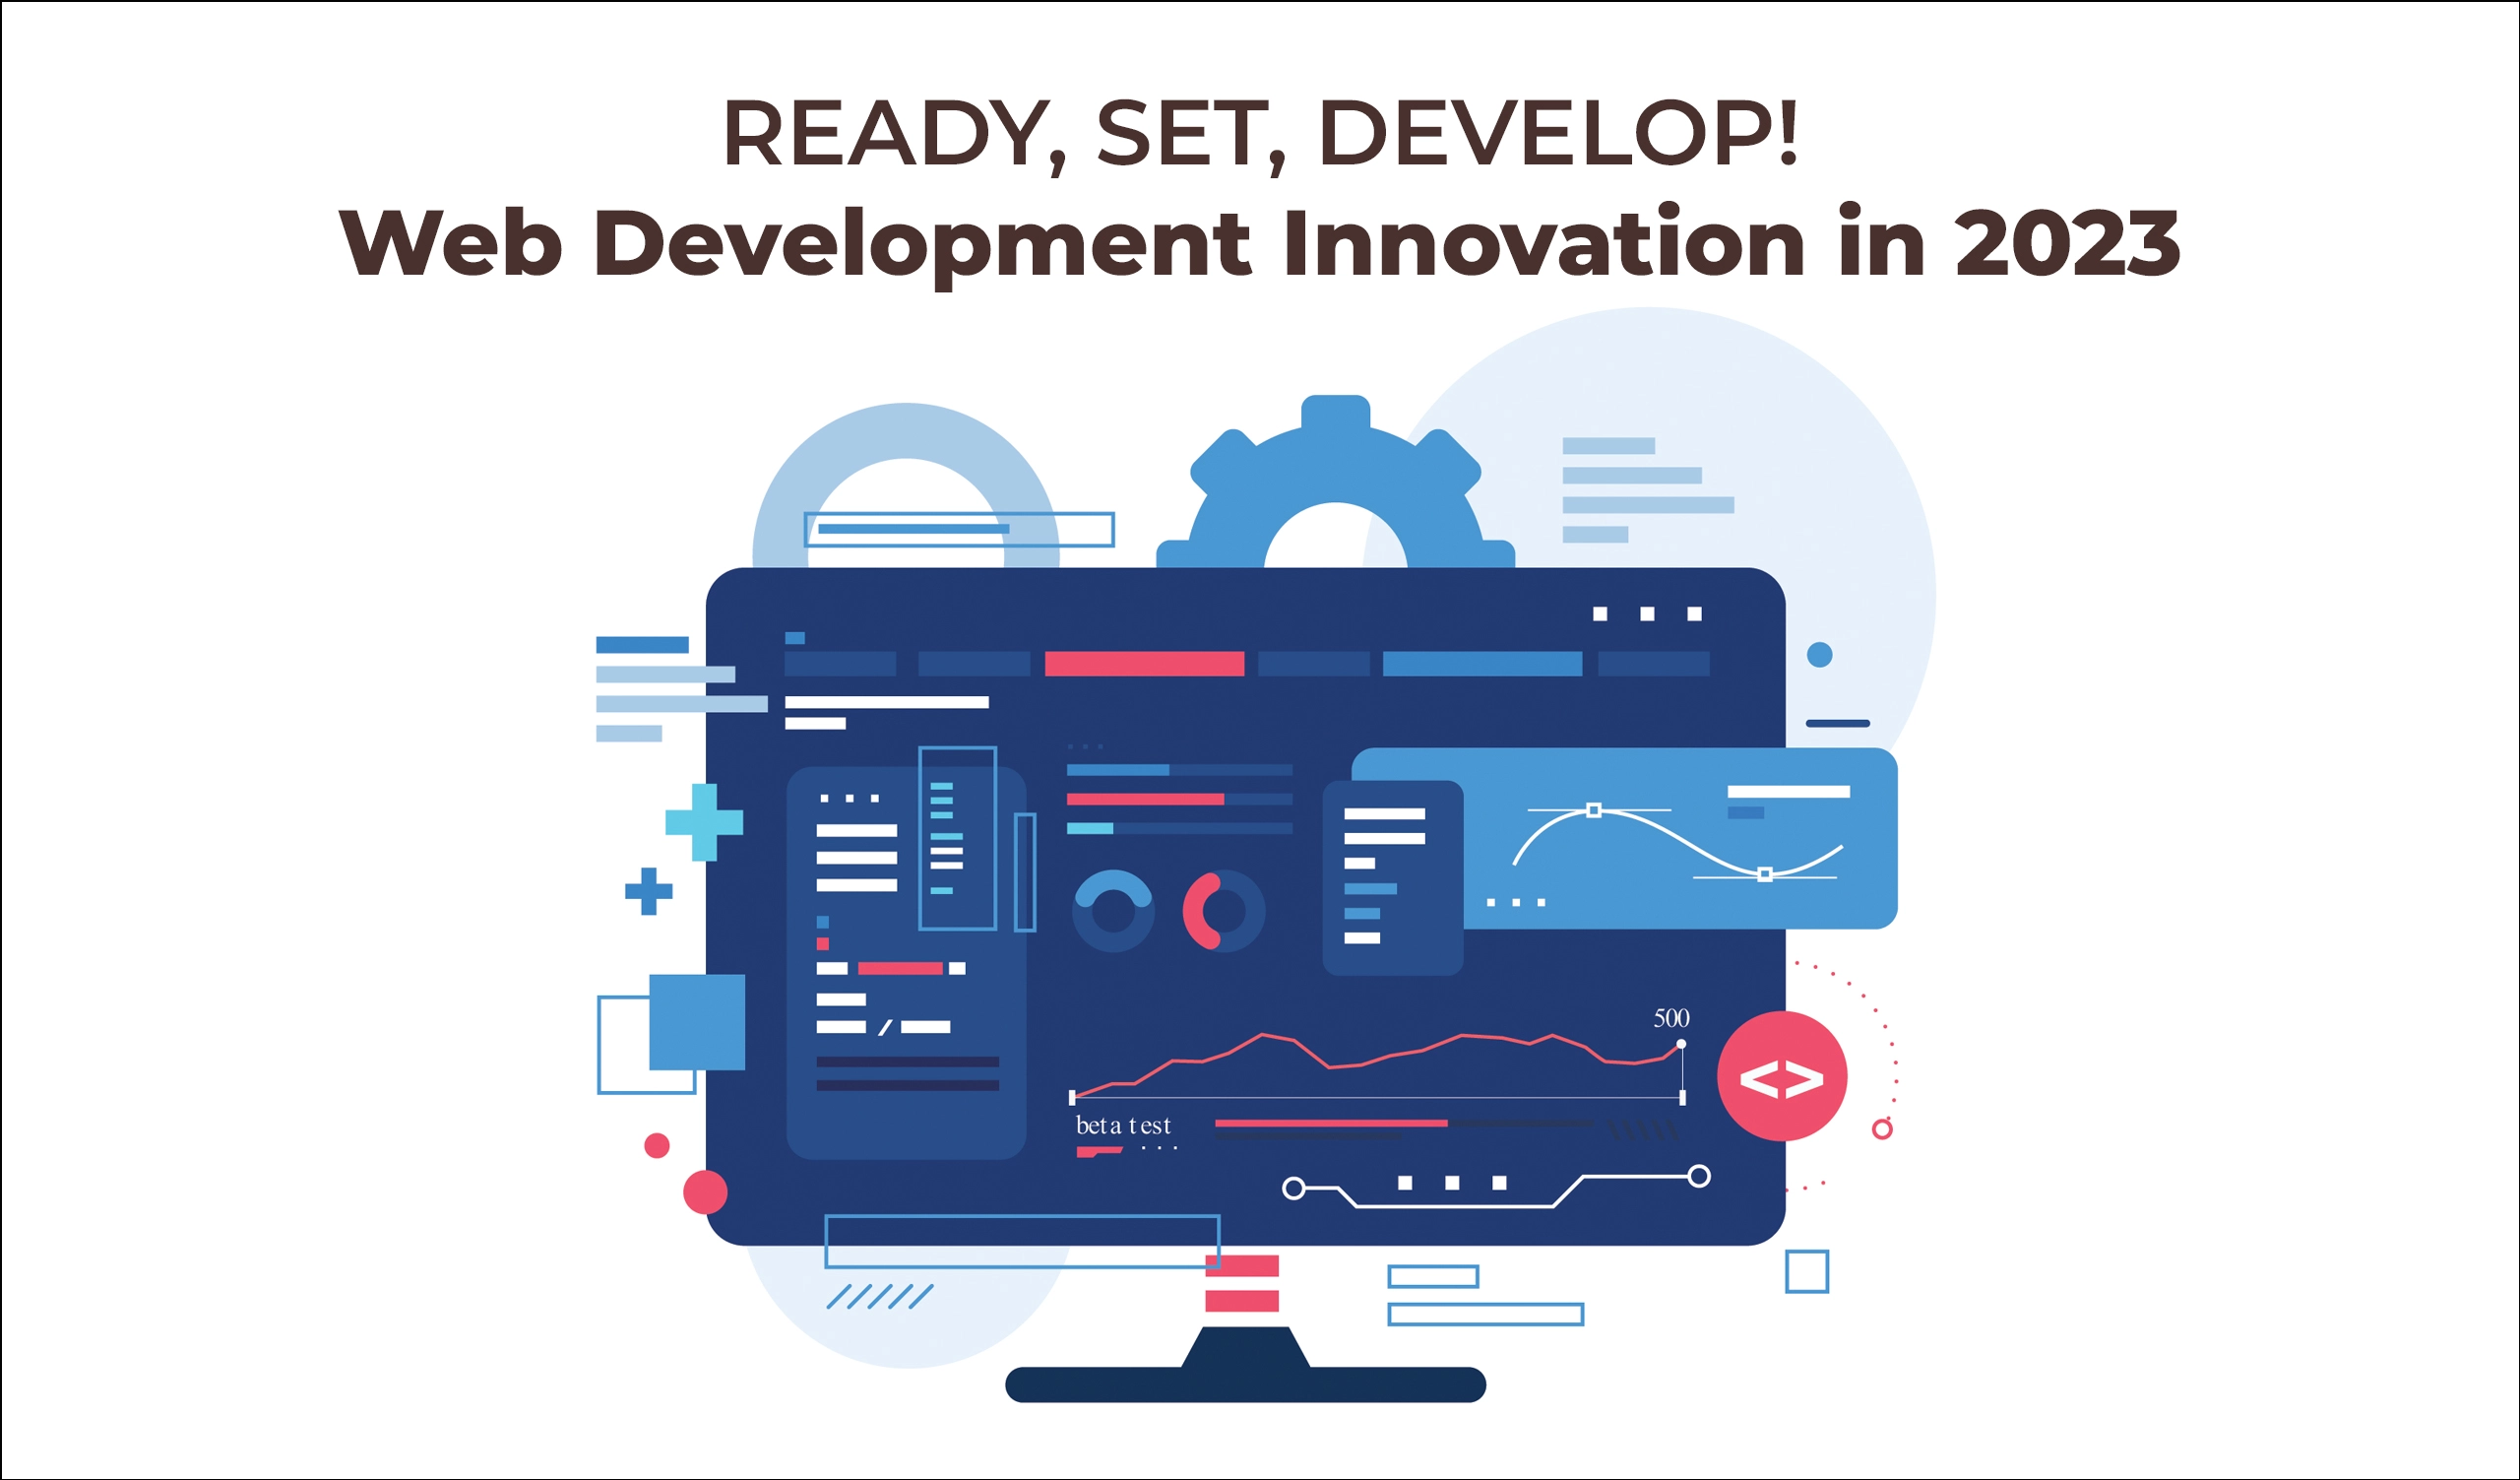 Ready, Set, Develop! A Look Ahead at Web Development Innovation in 2023